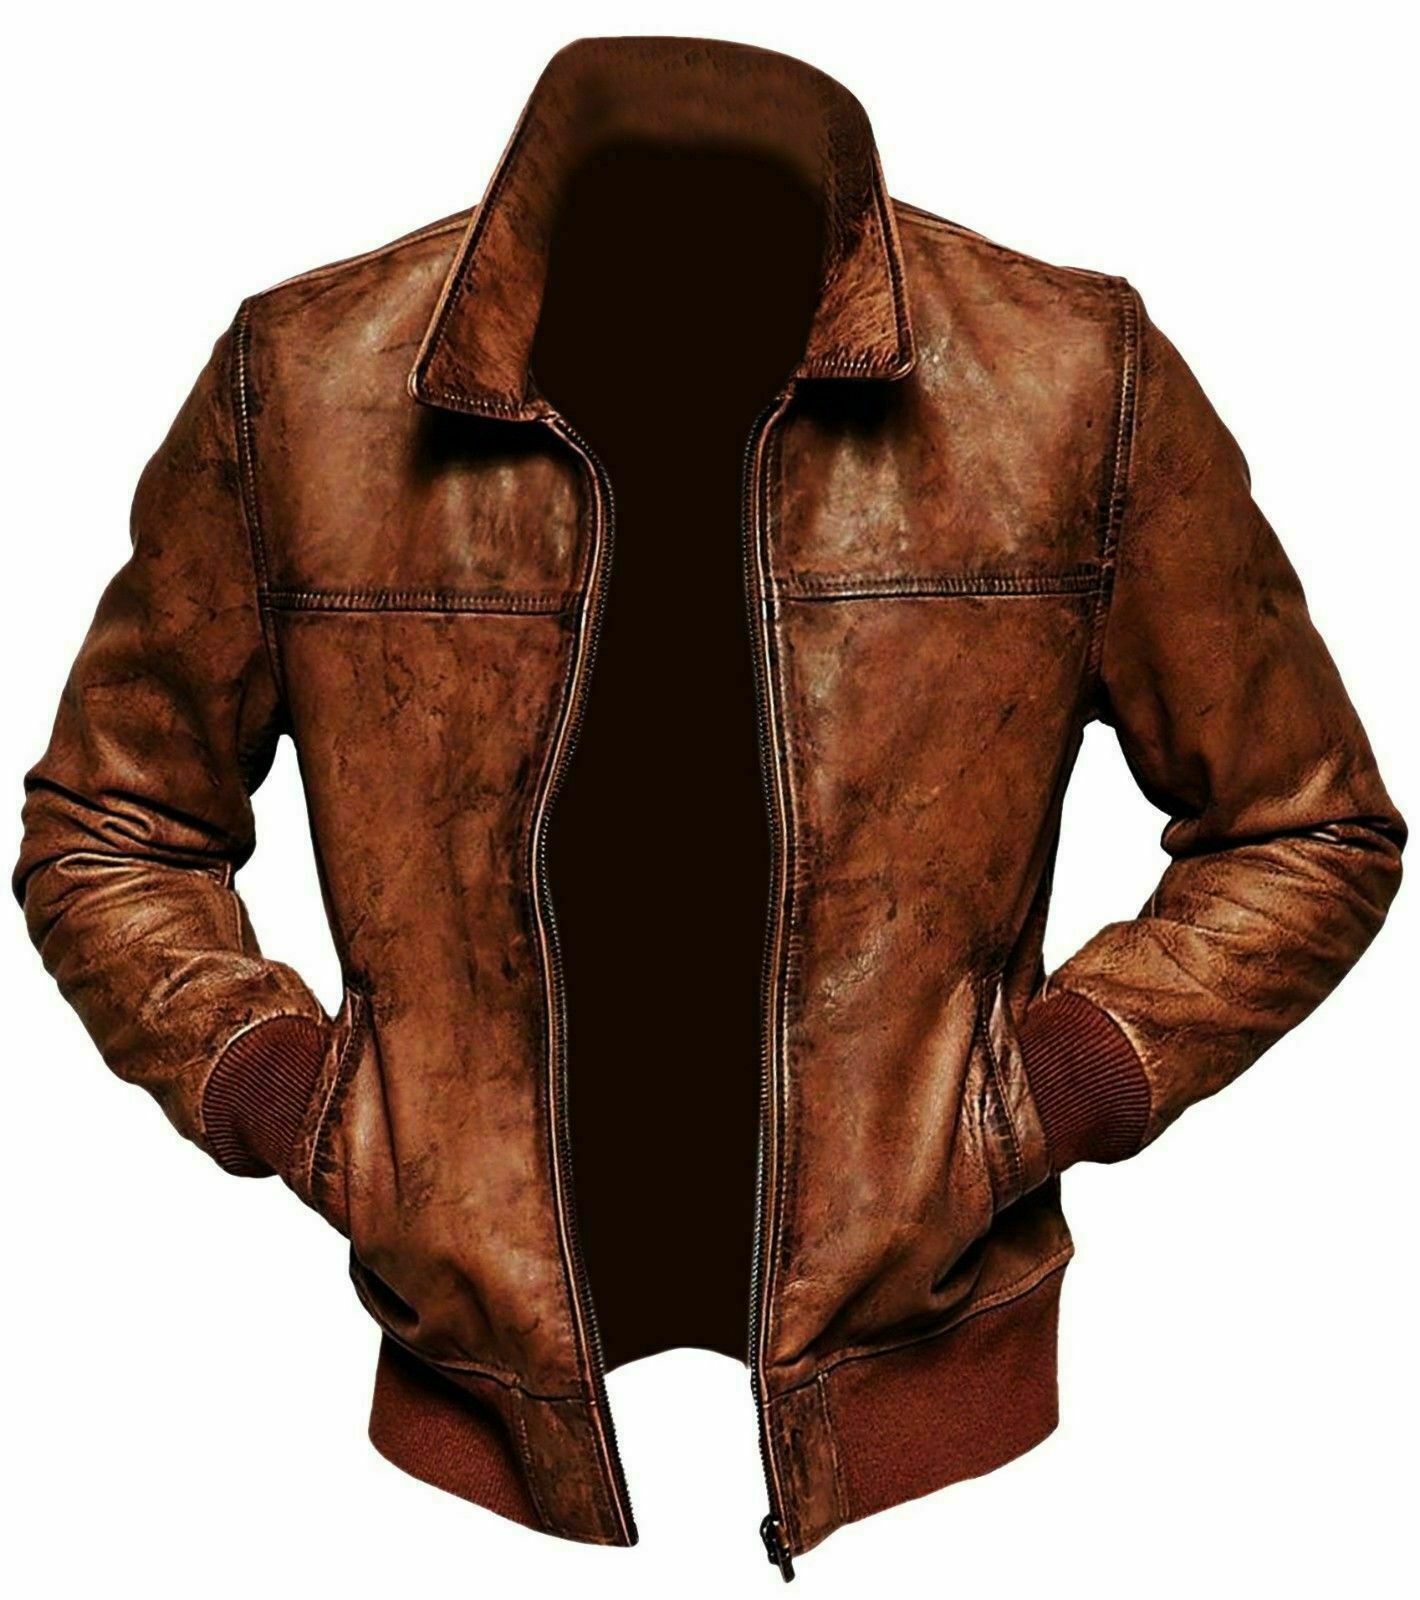 Mens Distressed Brown Leather Bomber Jacket